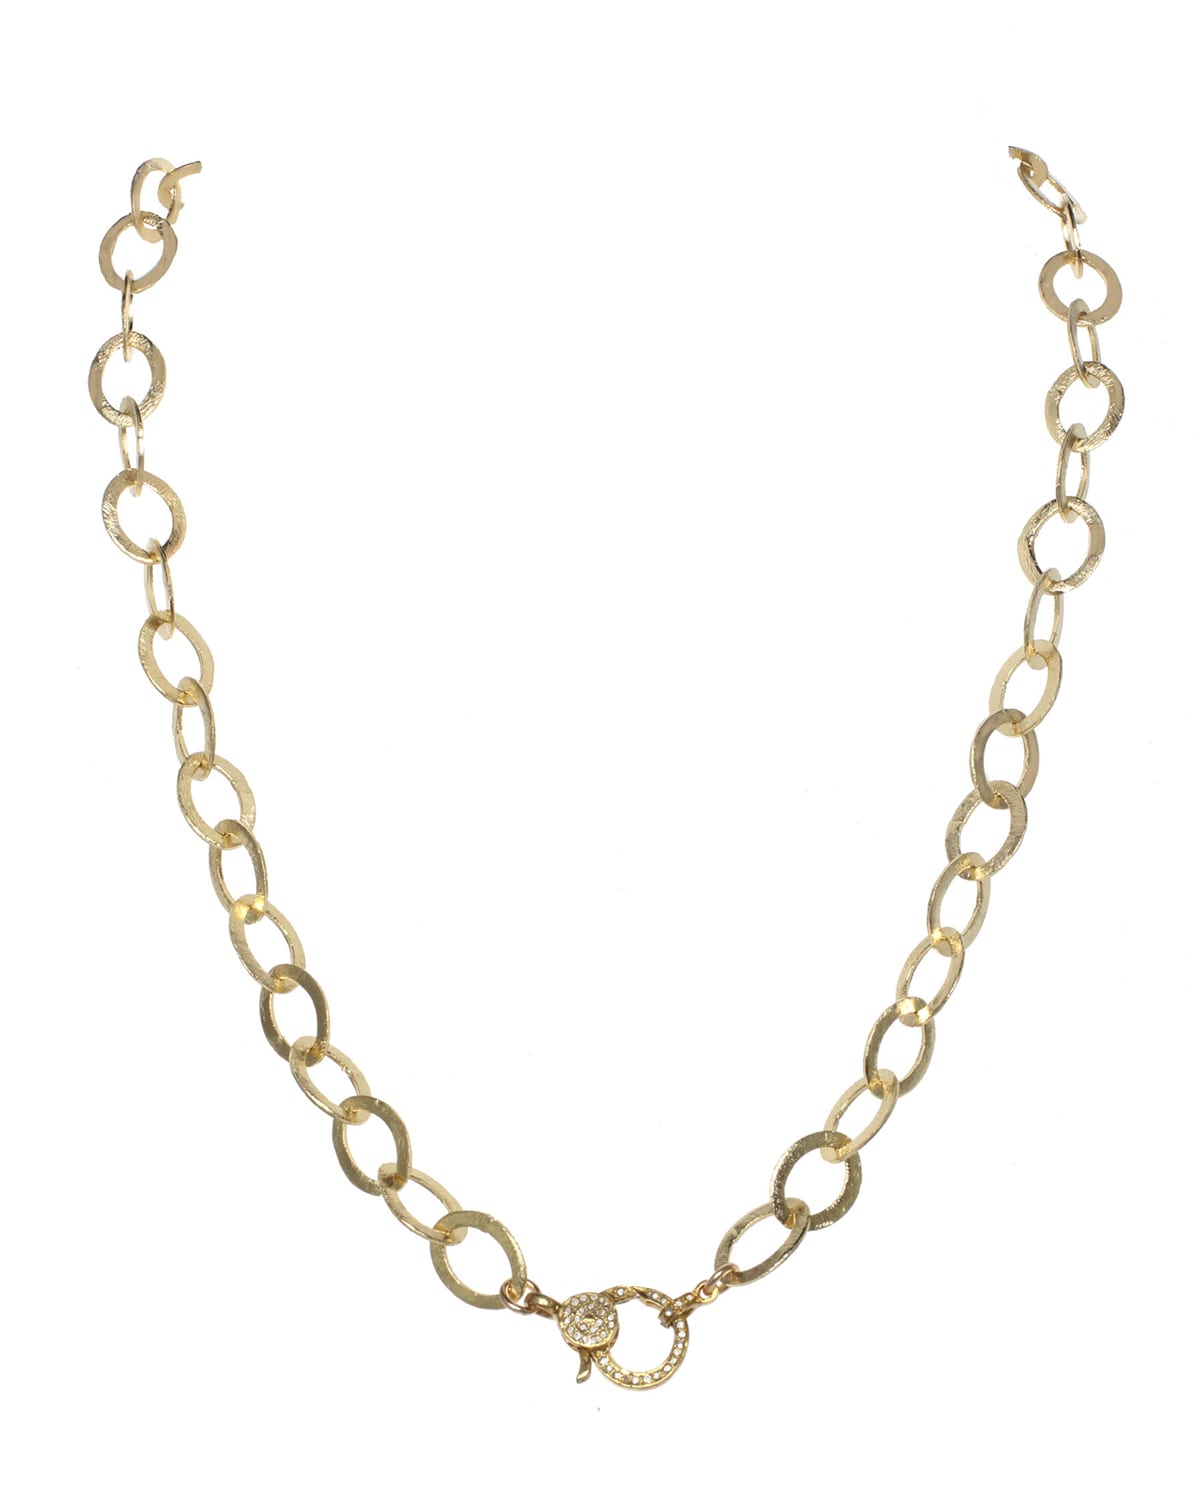 Matte Vermeil and Sterling Silver Flat Chain Necklace with Diamond Clasp